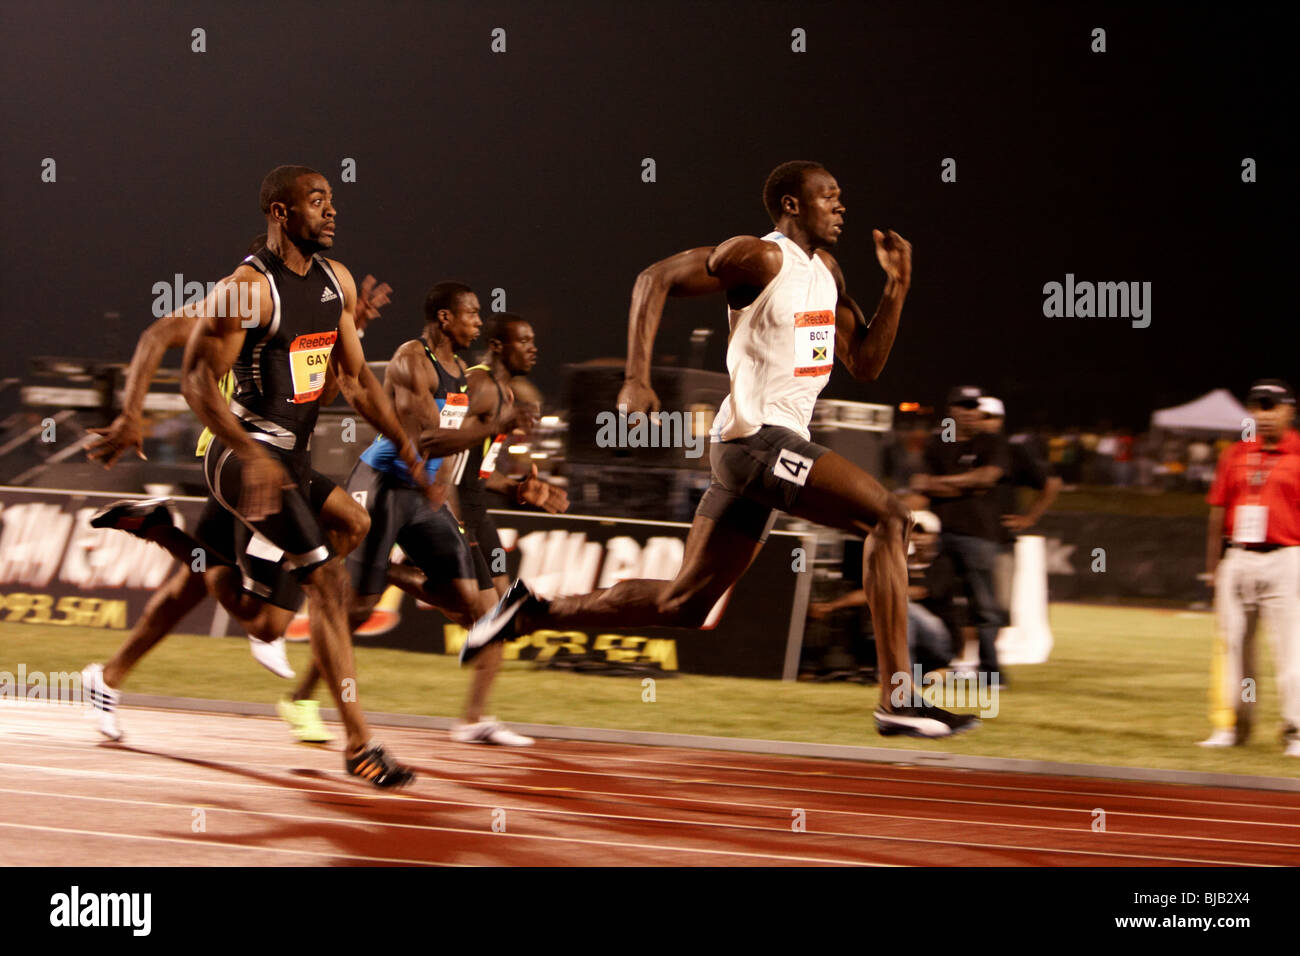 Jamaica S Usain Bolt Sets A New World Record In The Men S 100m Dash Finishing With A Time Of 9 72 Seconds Stock Photo Alamy